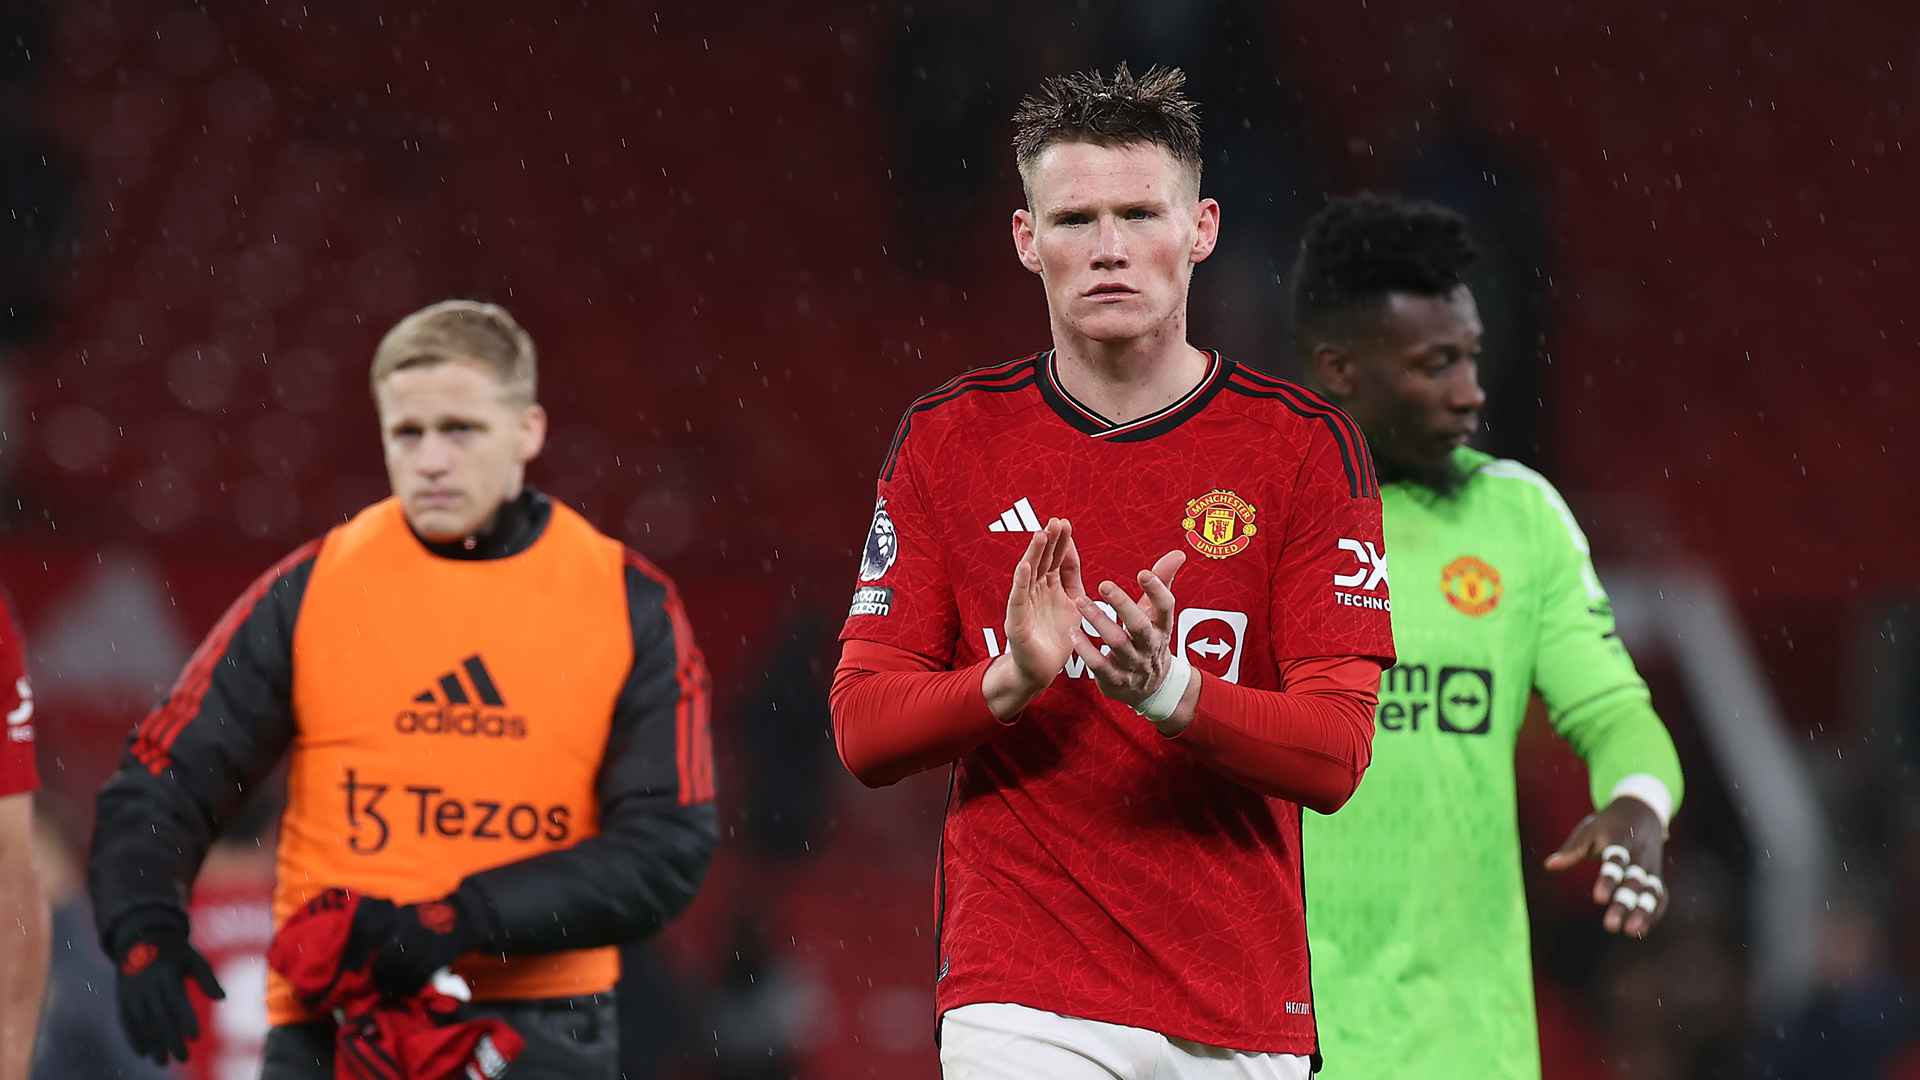 McTominay: We have to figure it out together